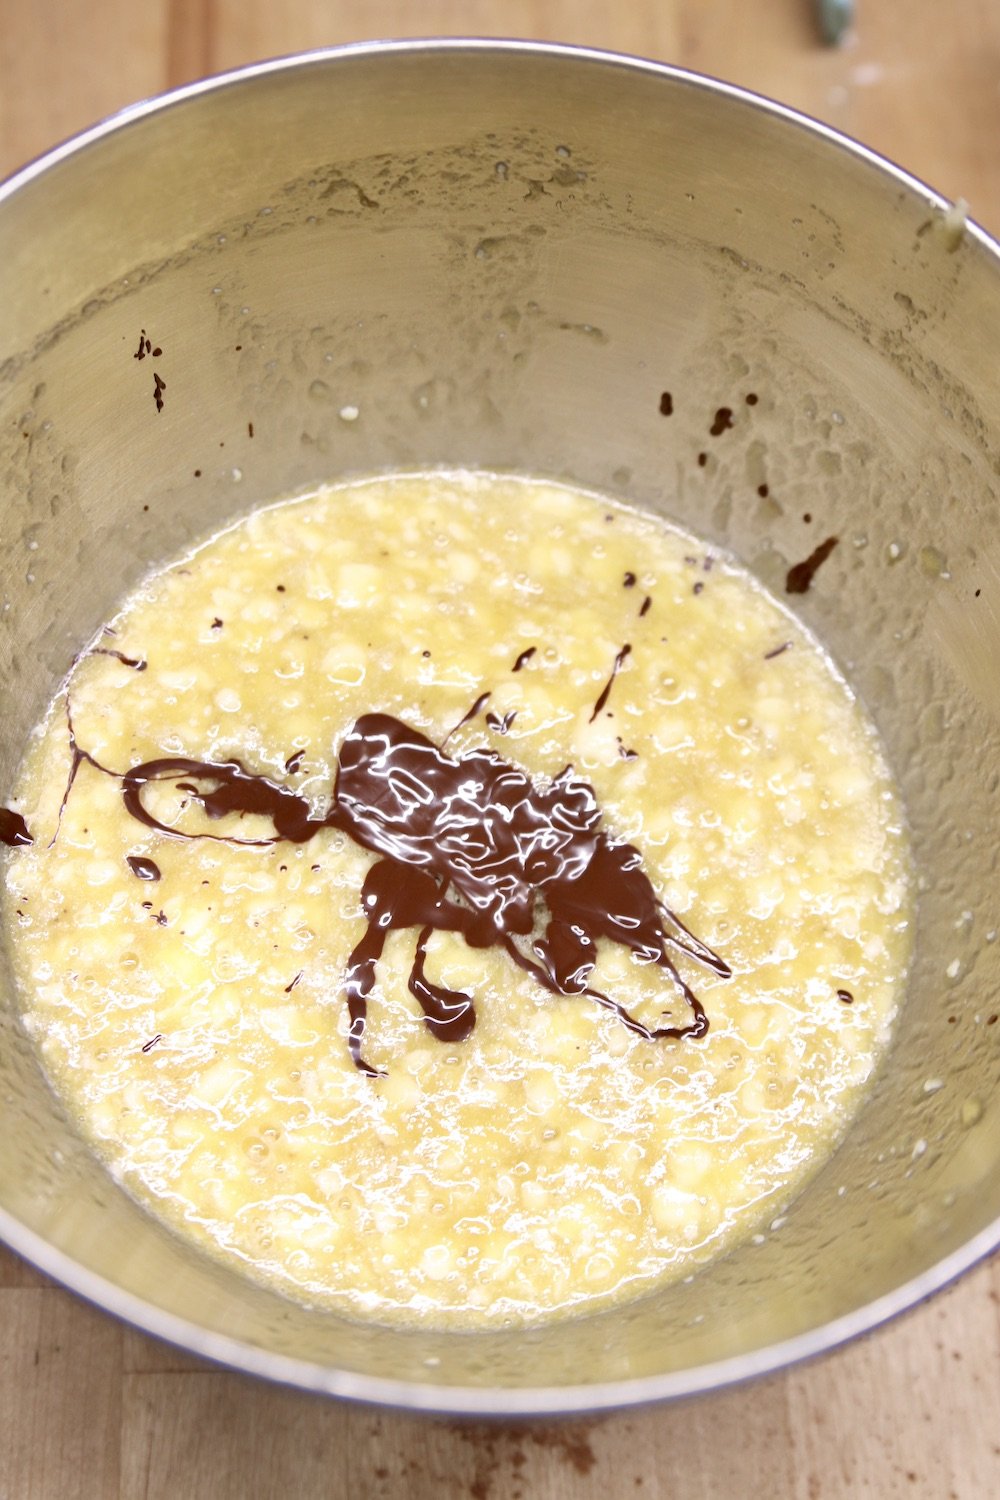 banana bread batter with melted chocolate